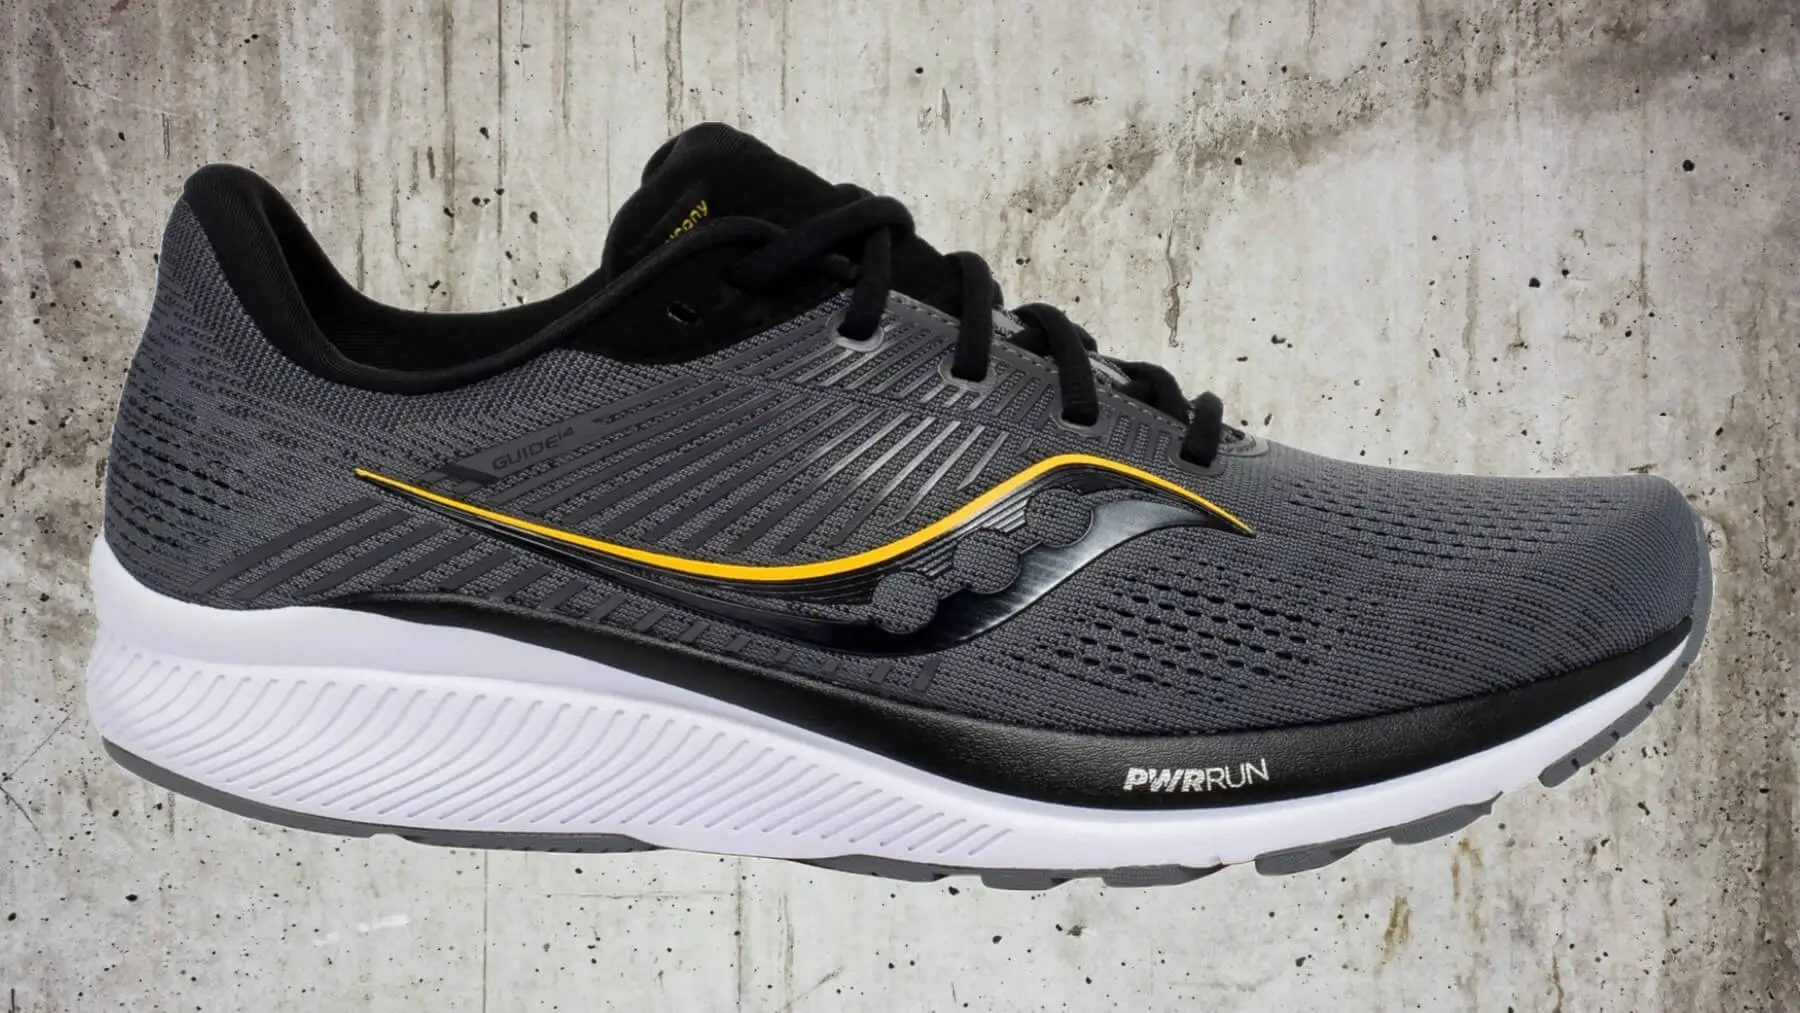 Saucony Guide 14 is among the best running shoes for flat feet.